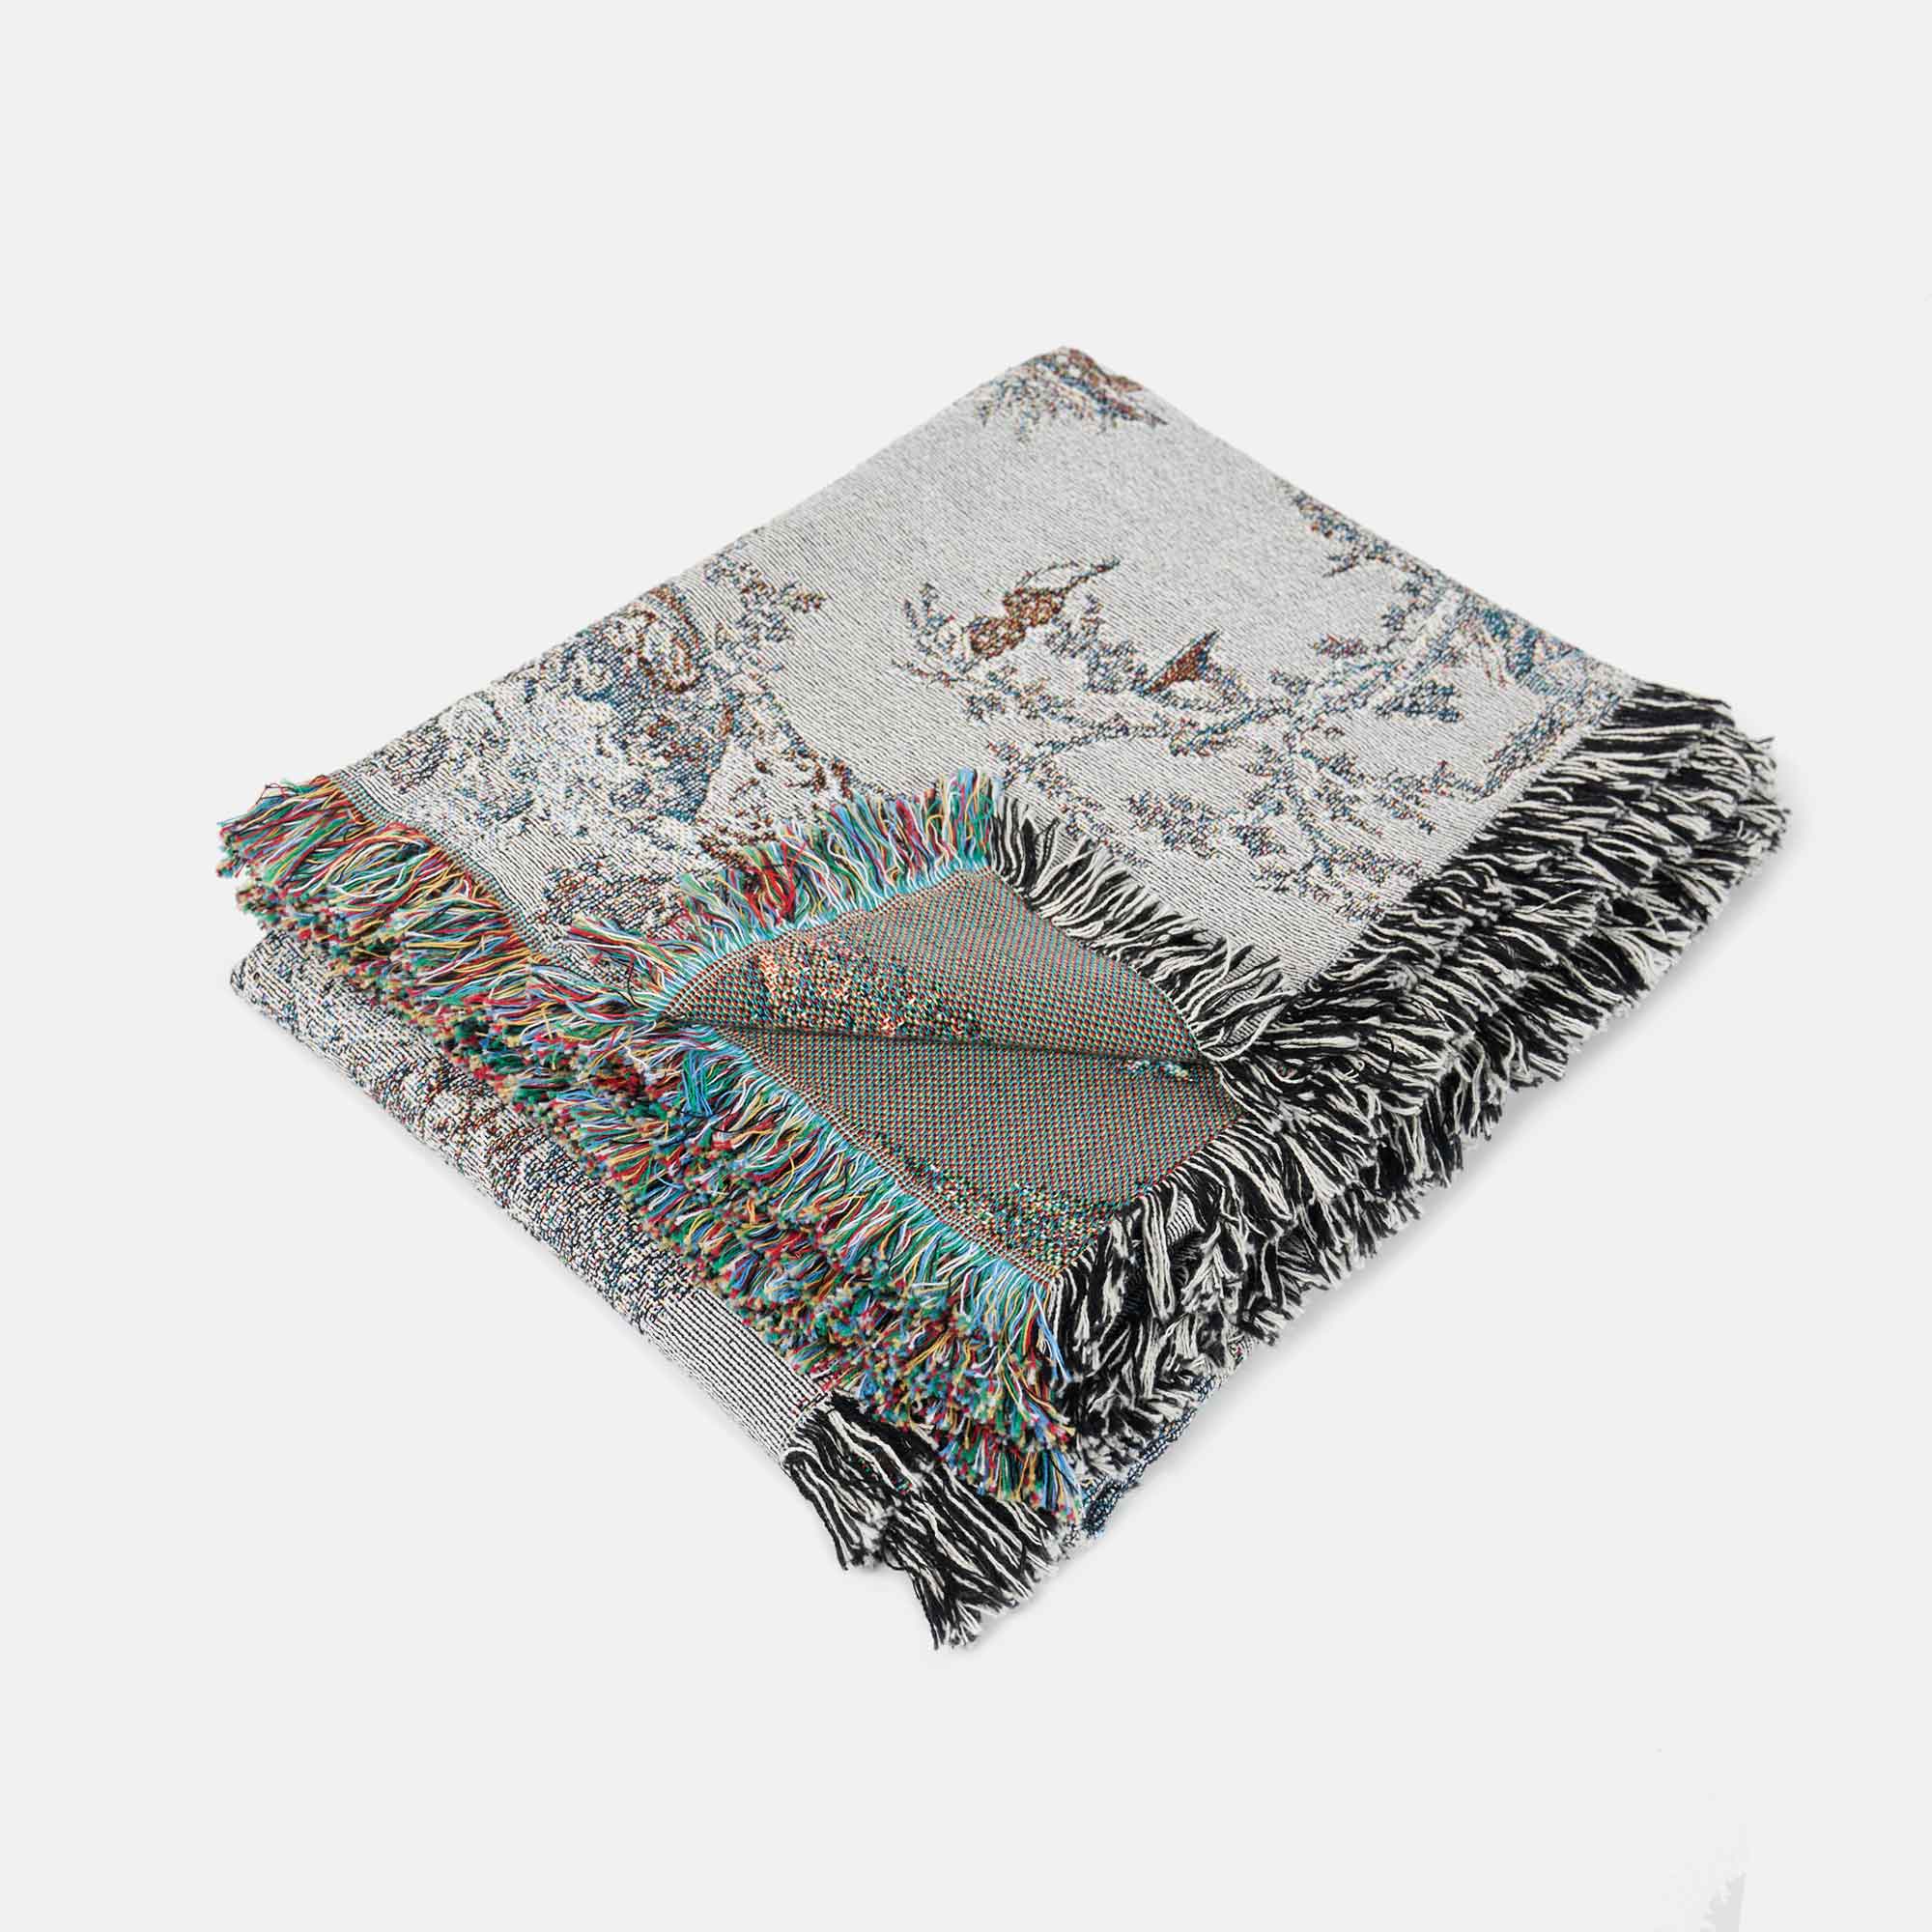 Flowerboy Project Toile Throw Blanket-White Folded